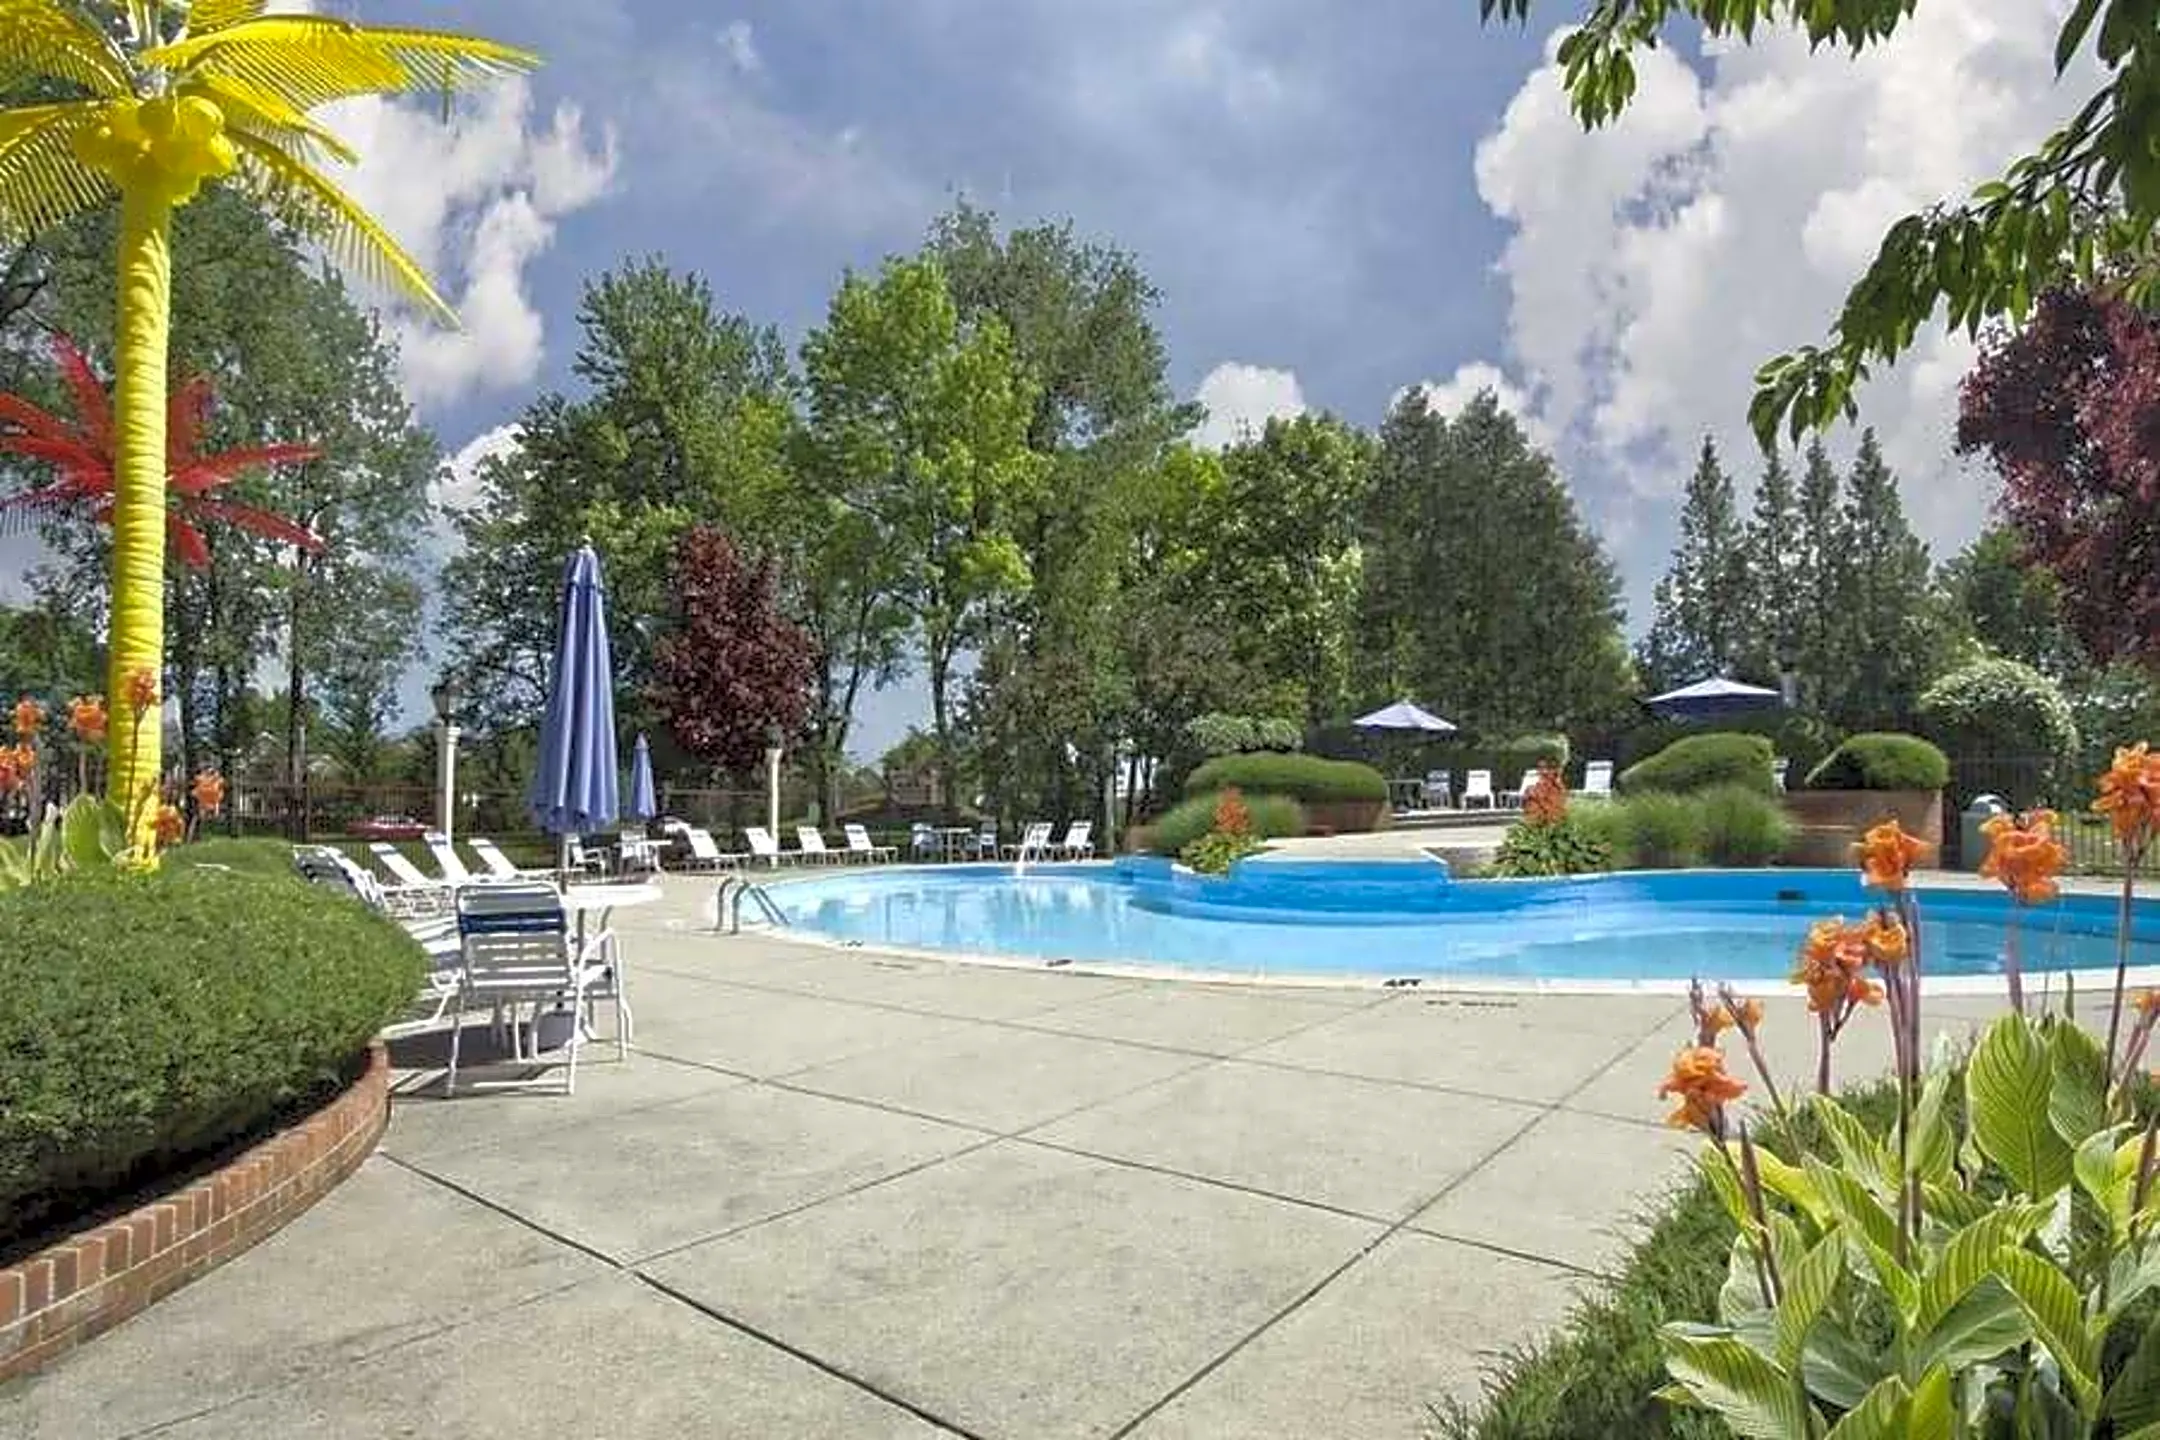 Pool - Steeplechase Apartments - Centerville, OH